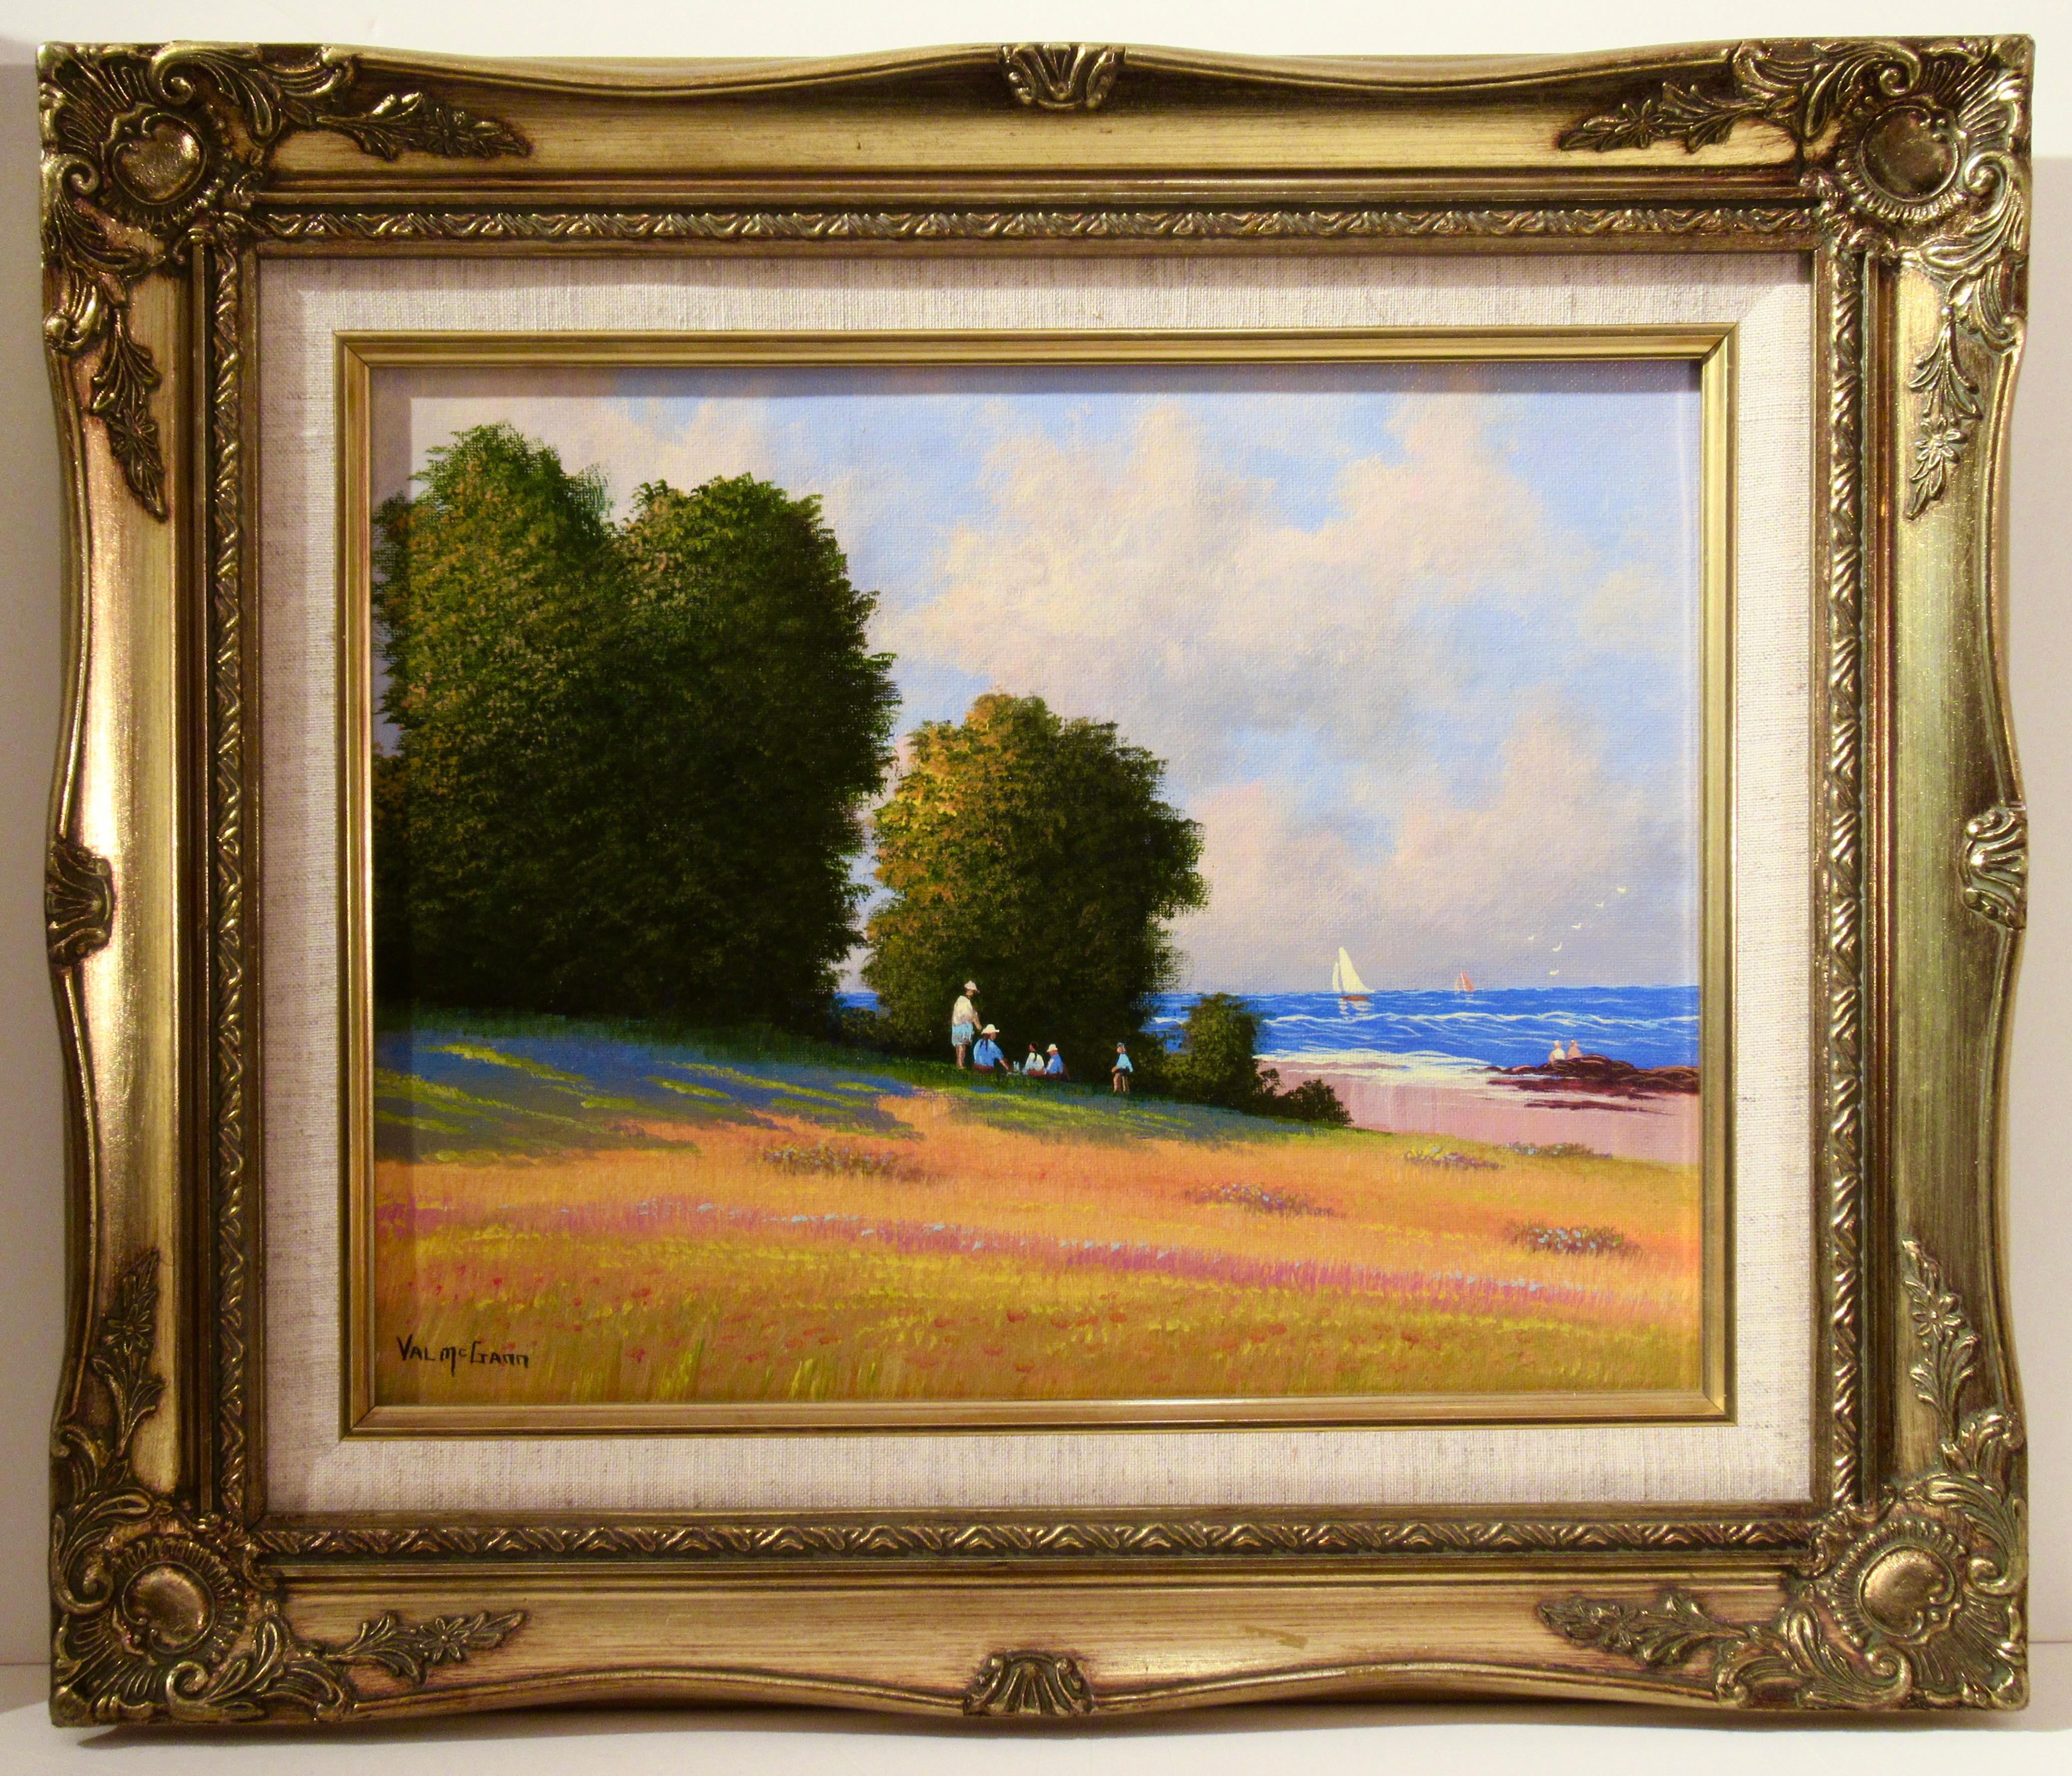 Val McGann Landscape Painting – The Picknick